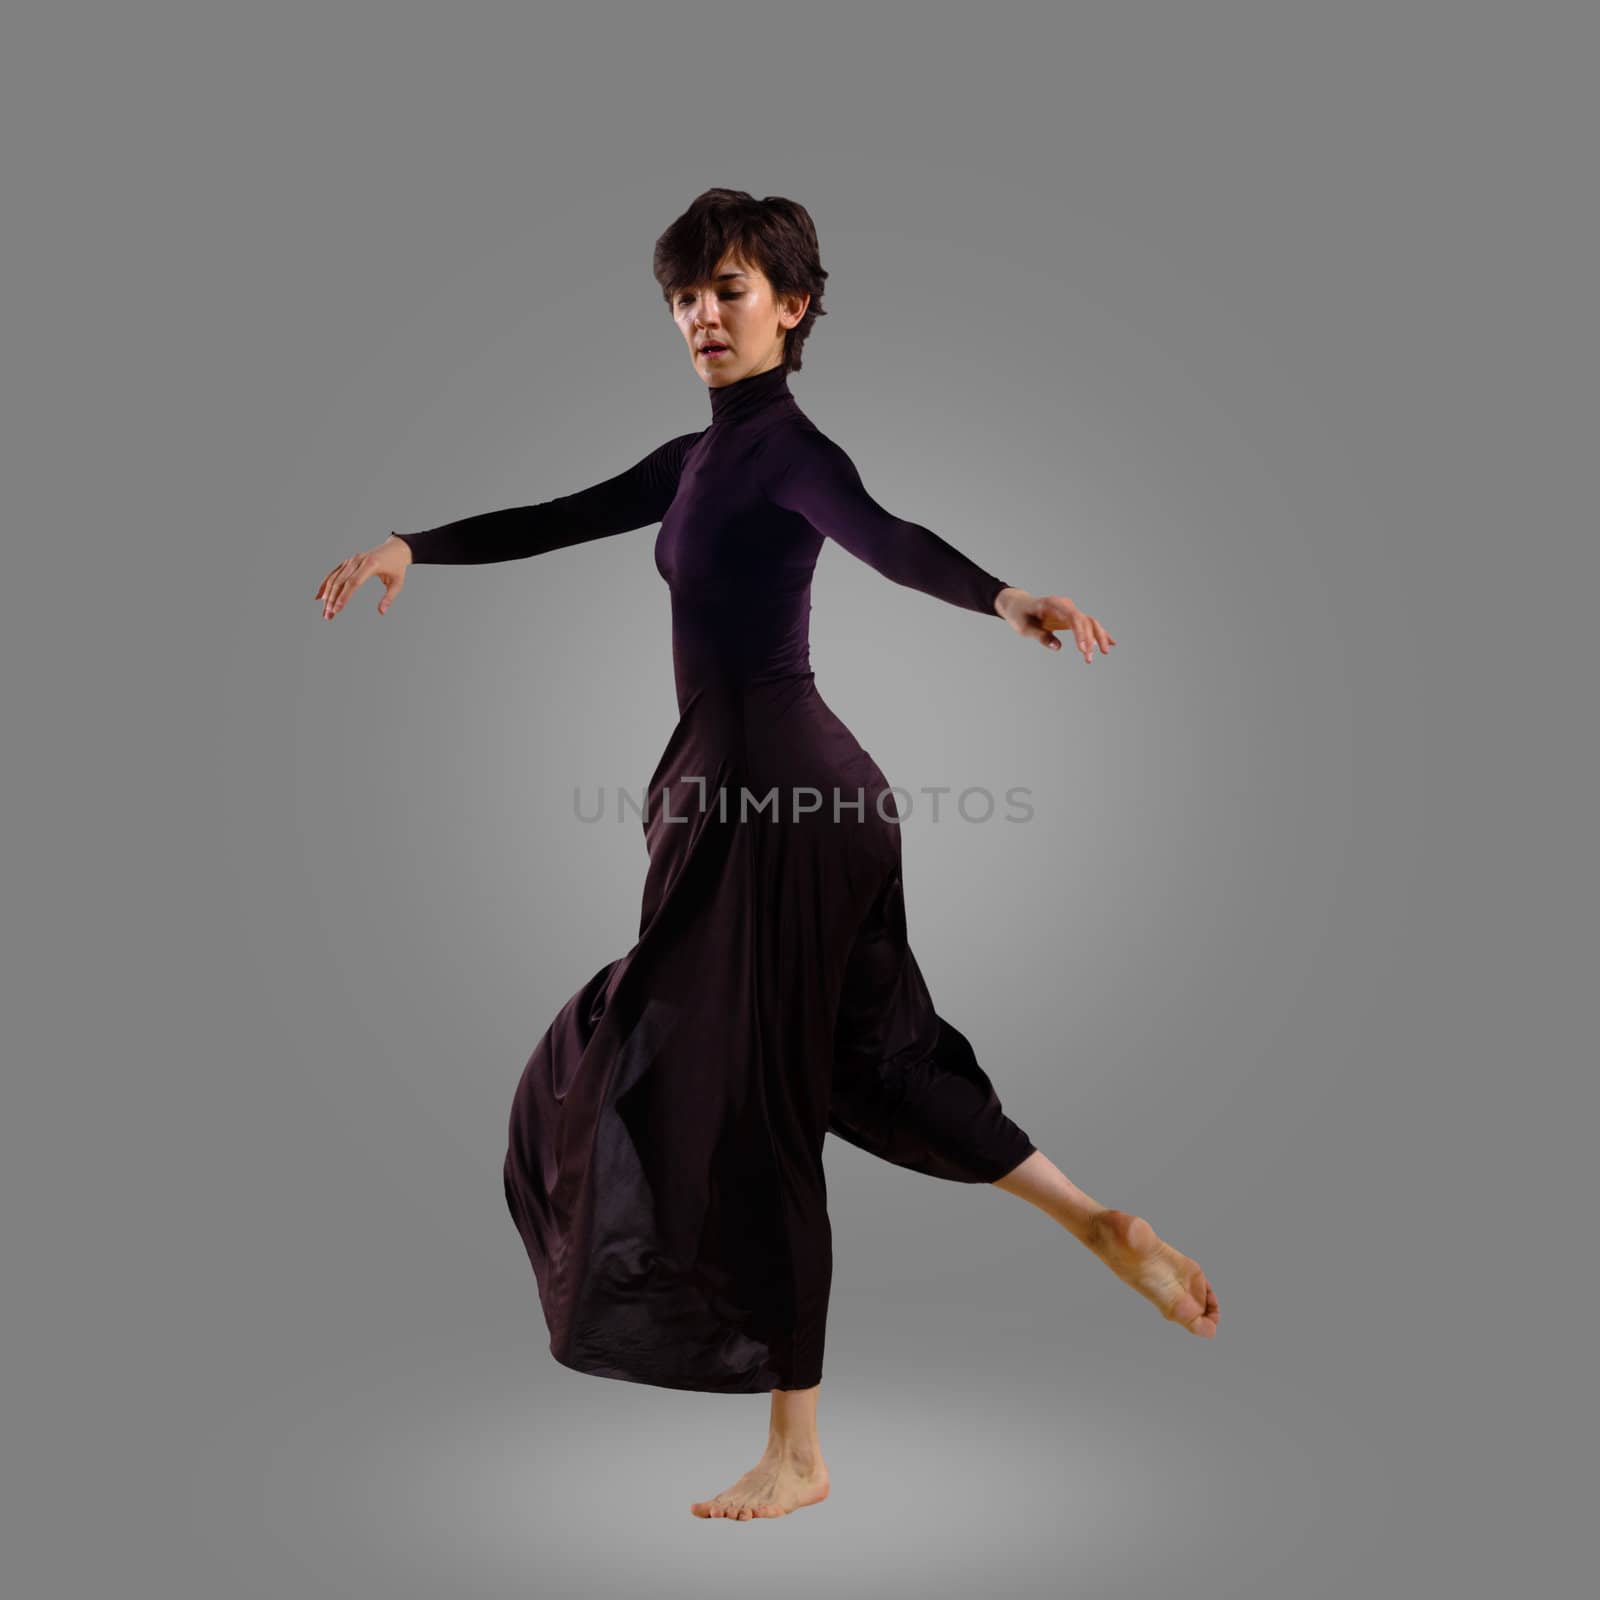 dancer on a gray background , motion